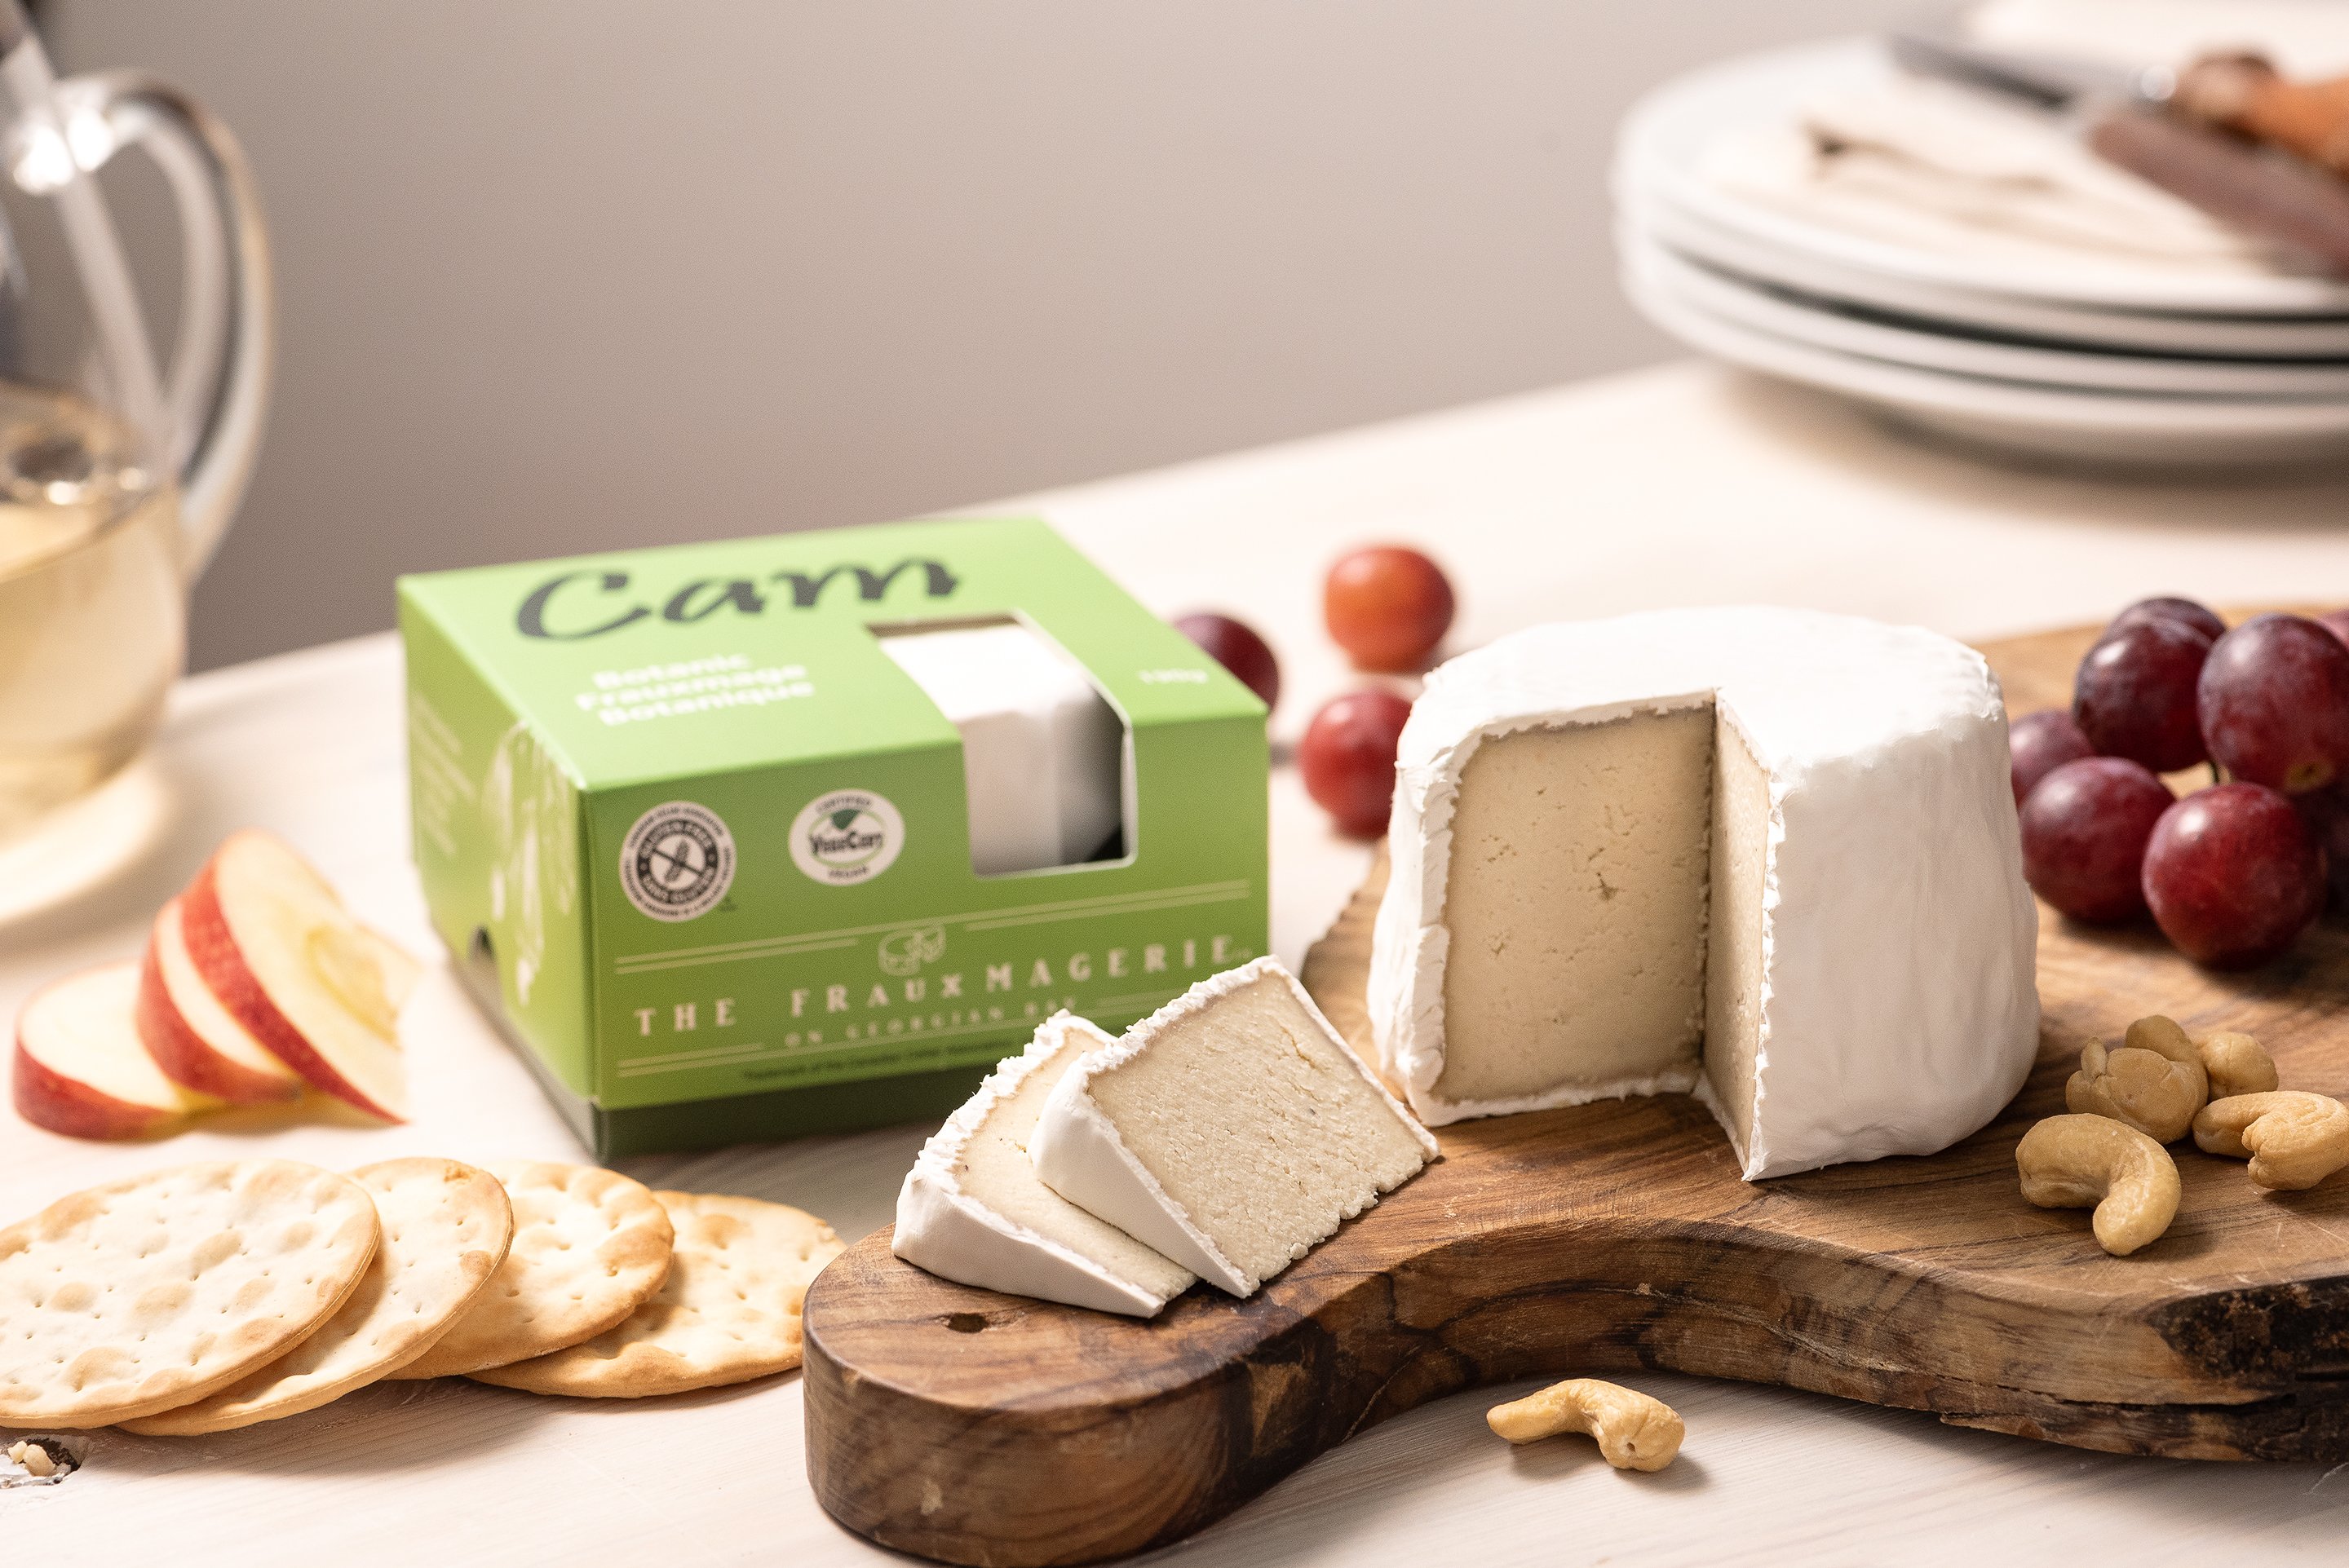 A vegan camembert cheese next to its packaging